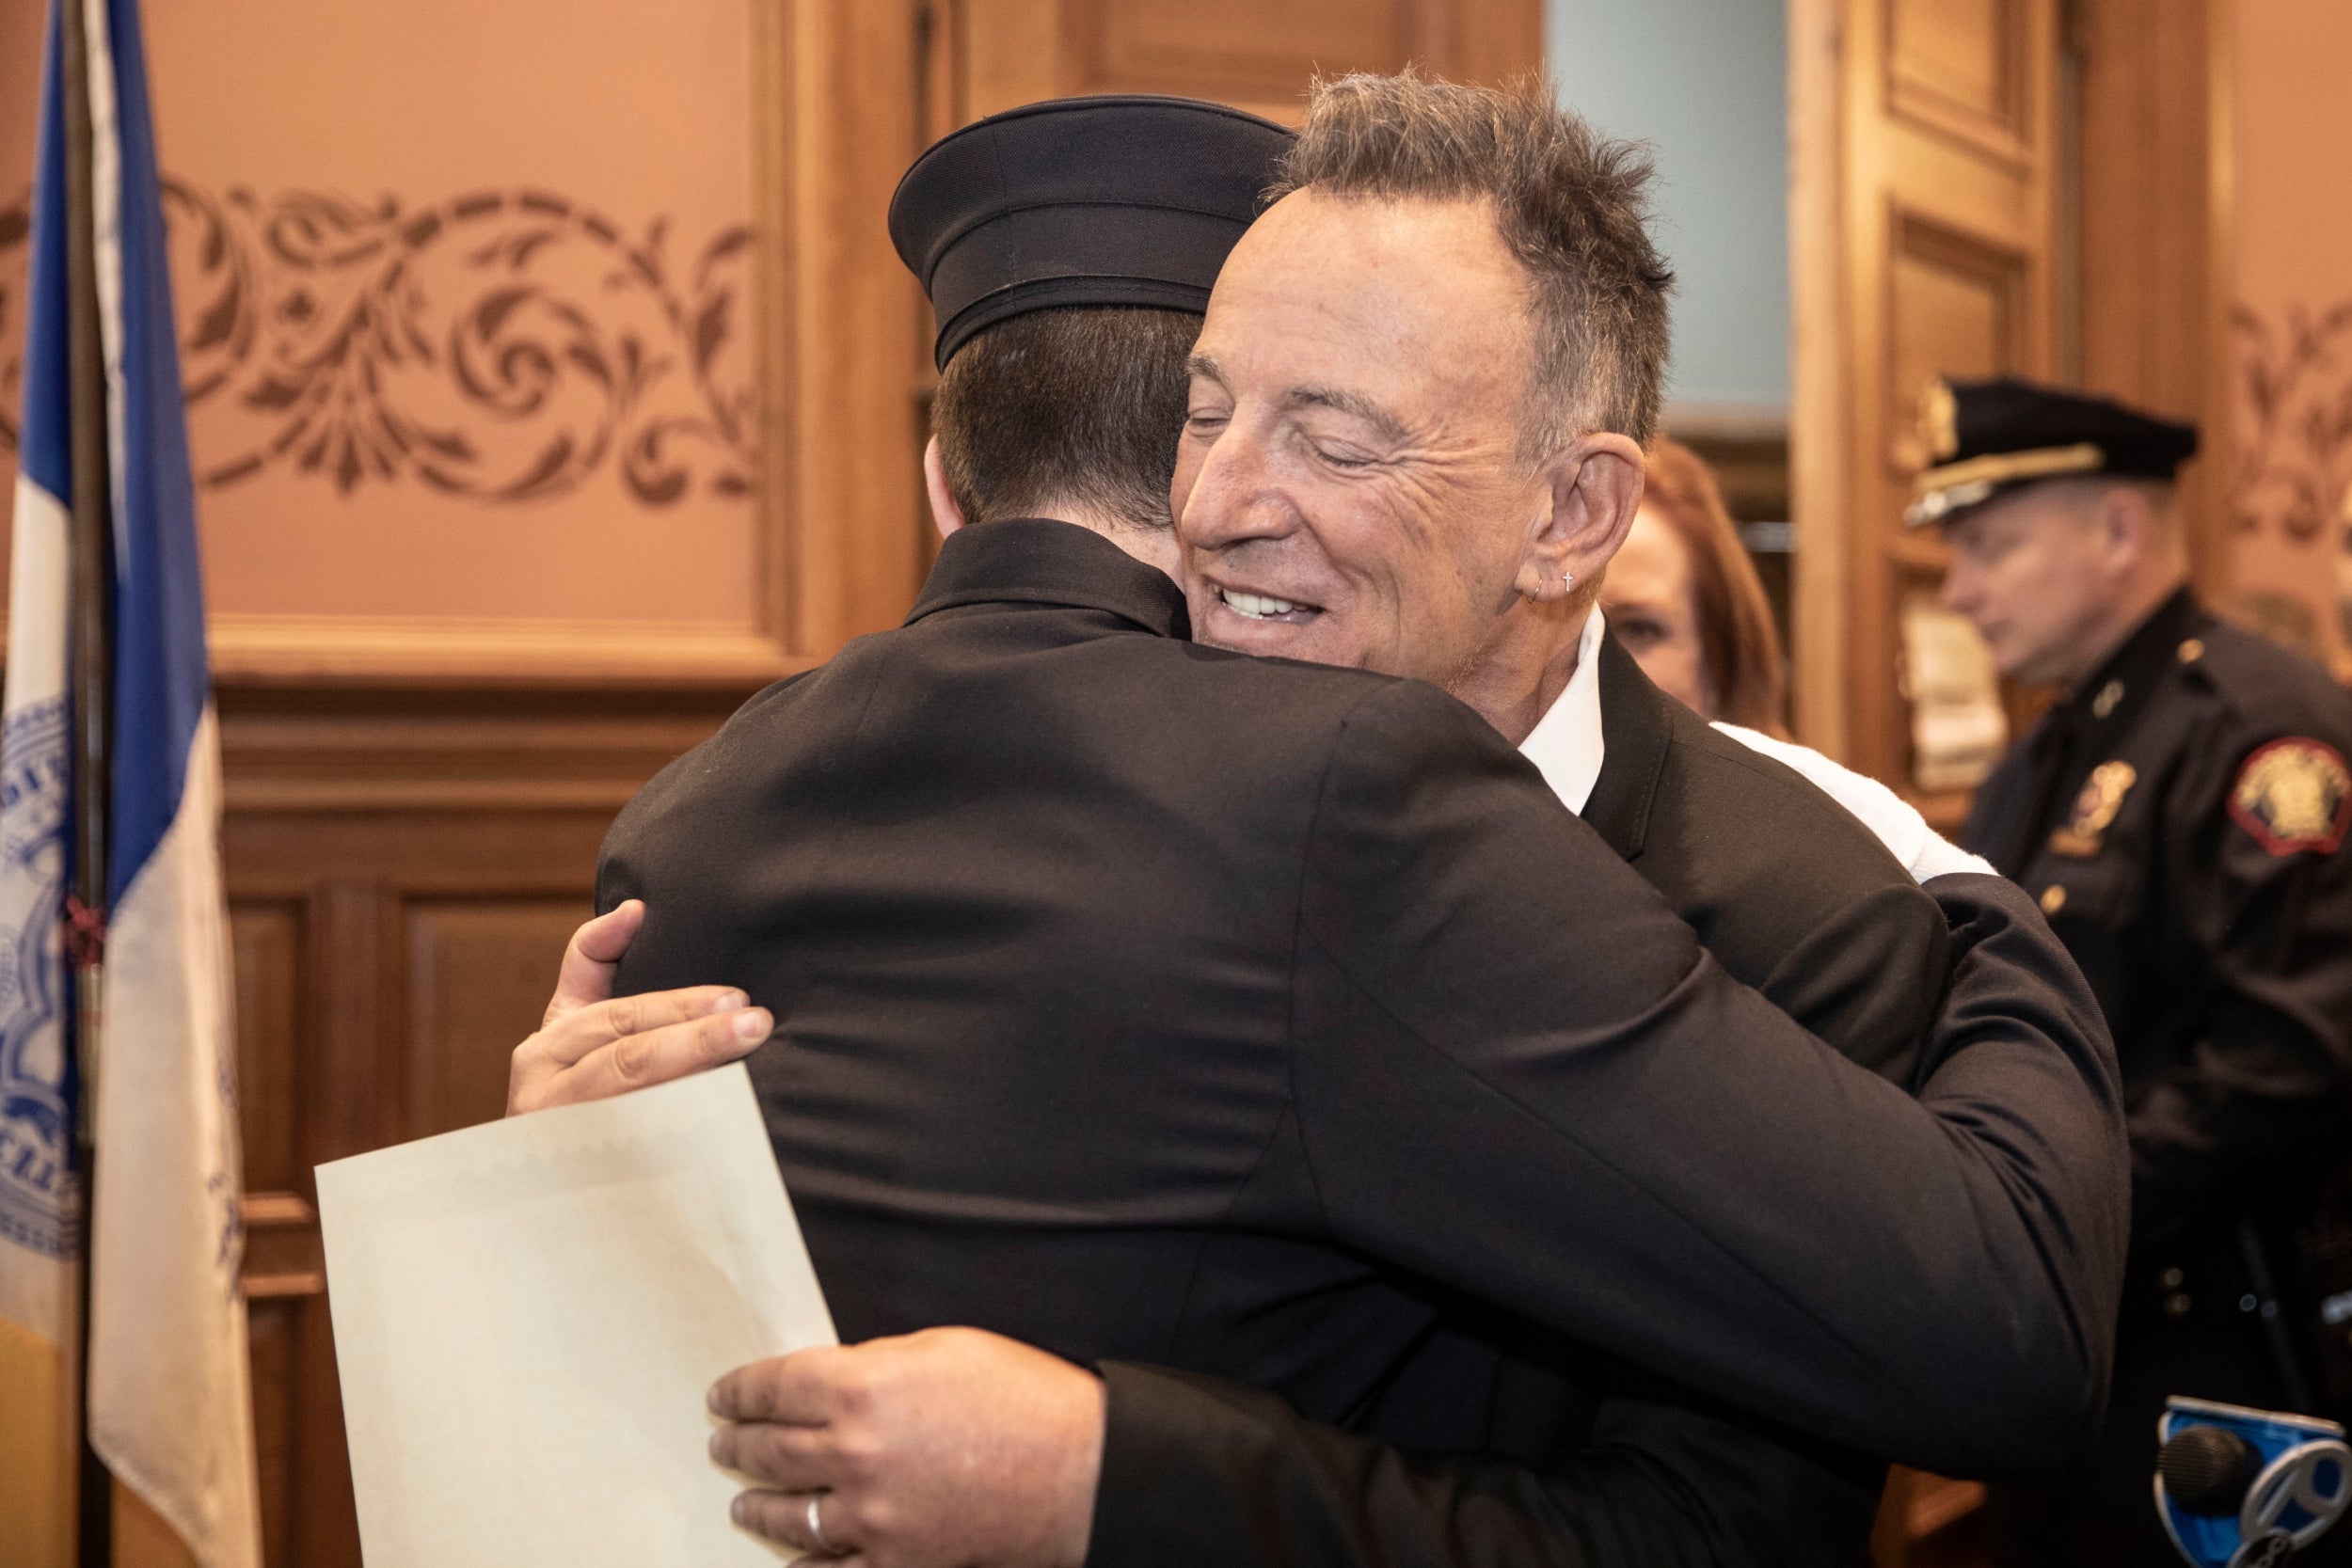 Bruce Springsteen hugs his son, Sam, after he was sworn in as a Jersey City firefighter